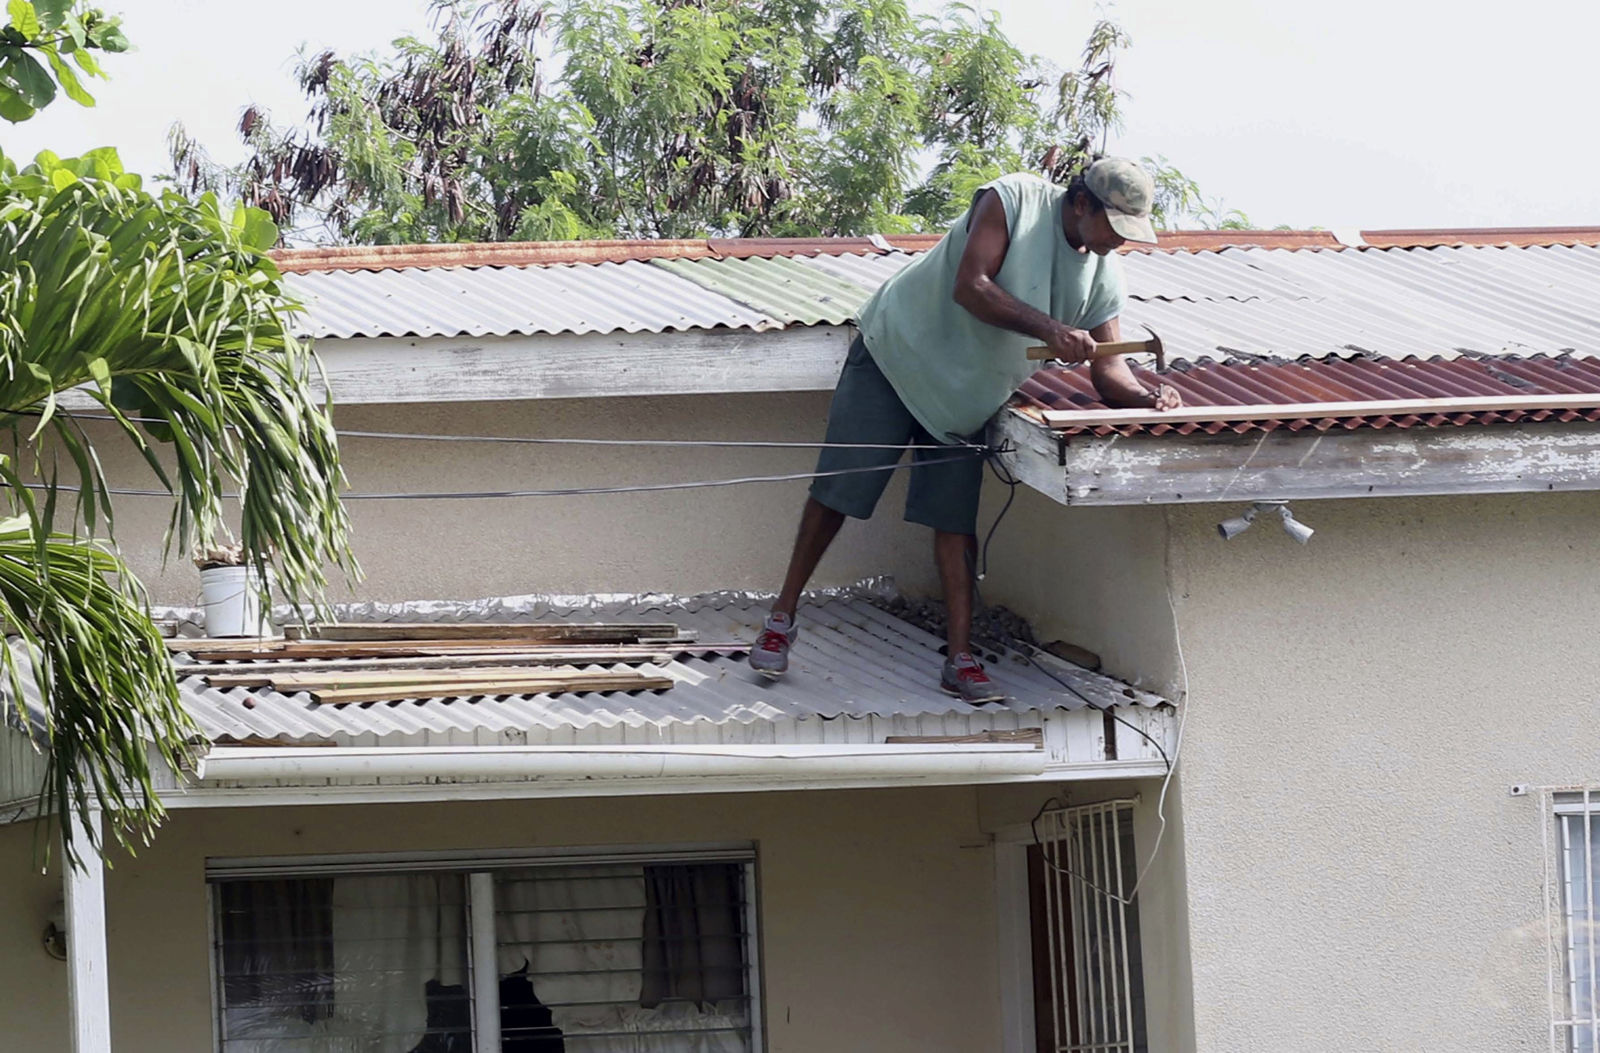 A homeowner makes last minute repairs to his roof in preparation for Hurricane Irma, in St. John's, Antigua and Barbuda, Tuesday, Sept. 5, 2017.  Irma grew into a dangerous Category 5 storm, the most powerful seen in the Atlantic in over a decade, and roared toward islands in the northeast Caribbean Tuesday on a path that could eventually take it to the United States. (AP Photo/Johnny Jno-Baptiste)